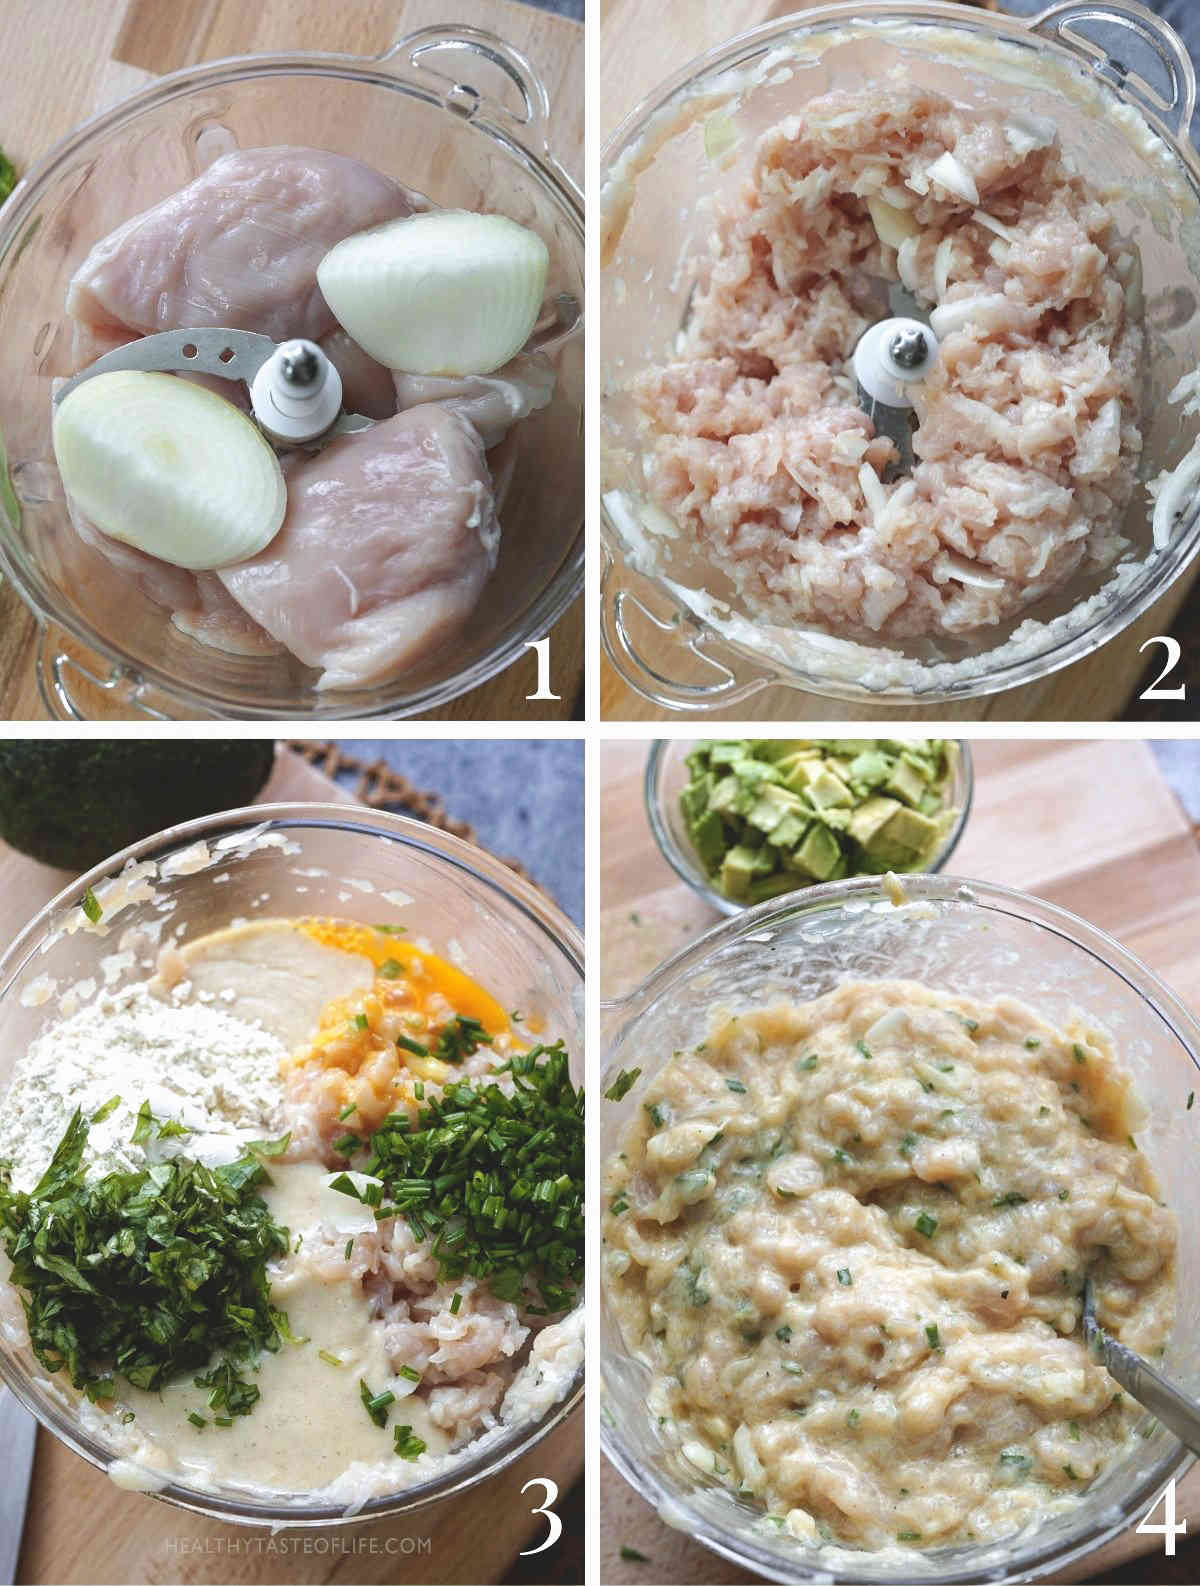 Process images showing step by step how to make the chicken fritters mixture, by chopping the chiken in a food processor first then adding the rest of ingredients.